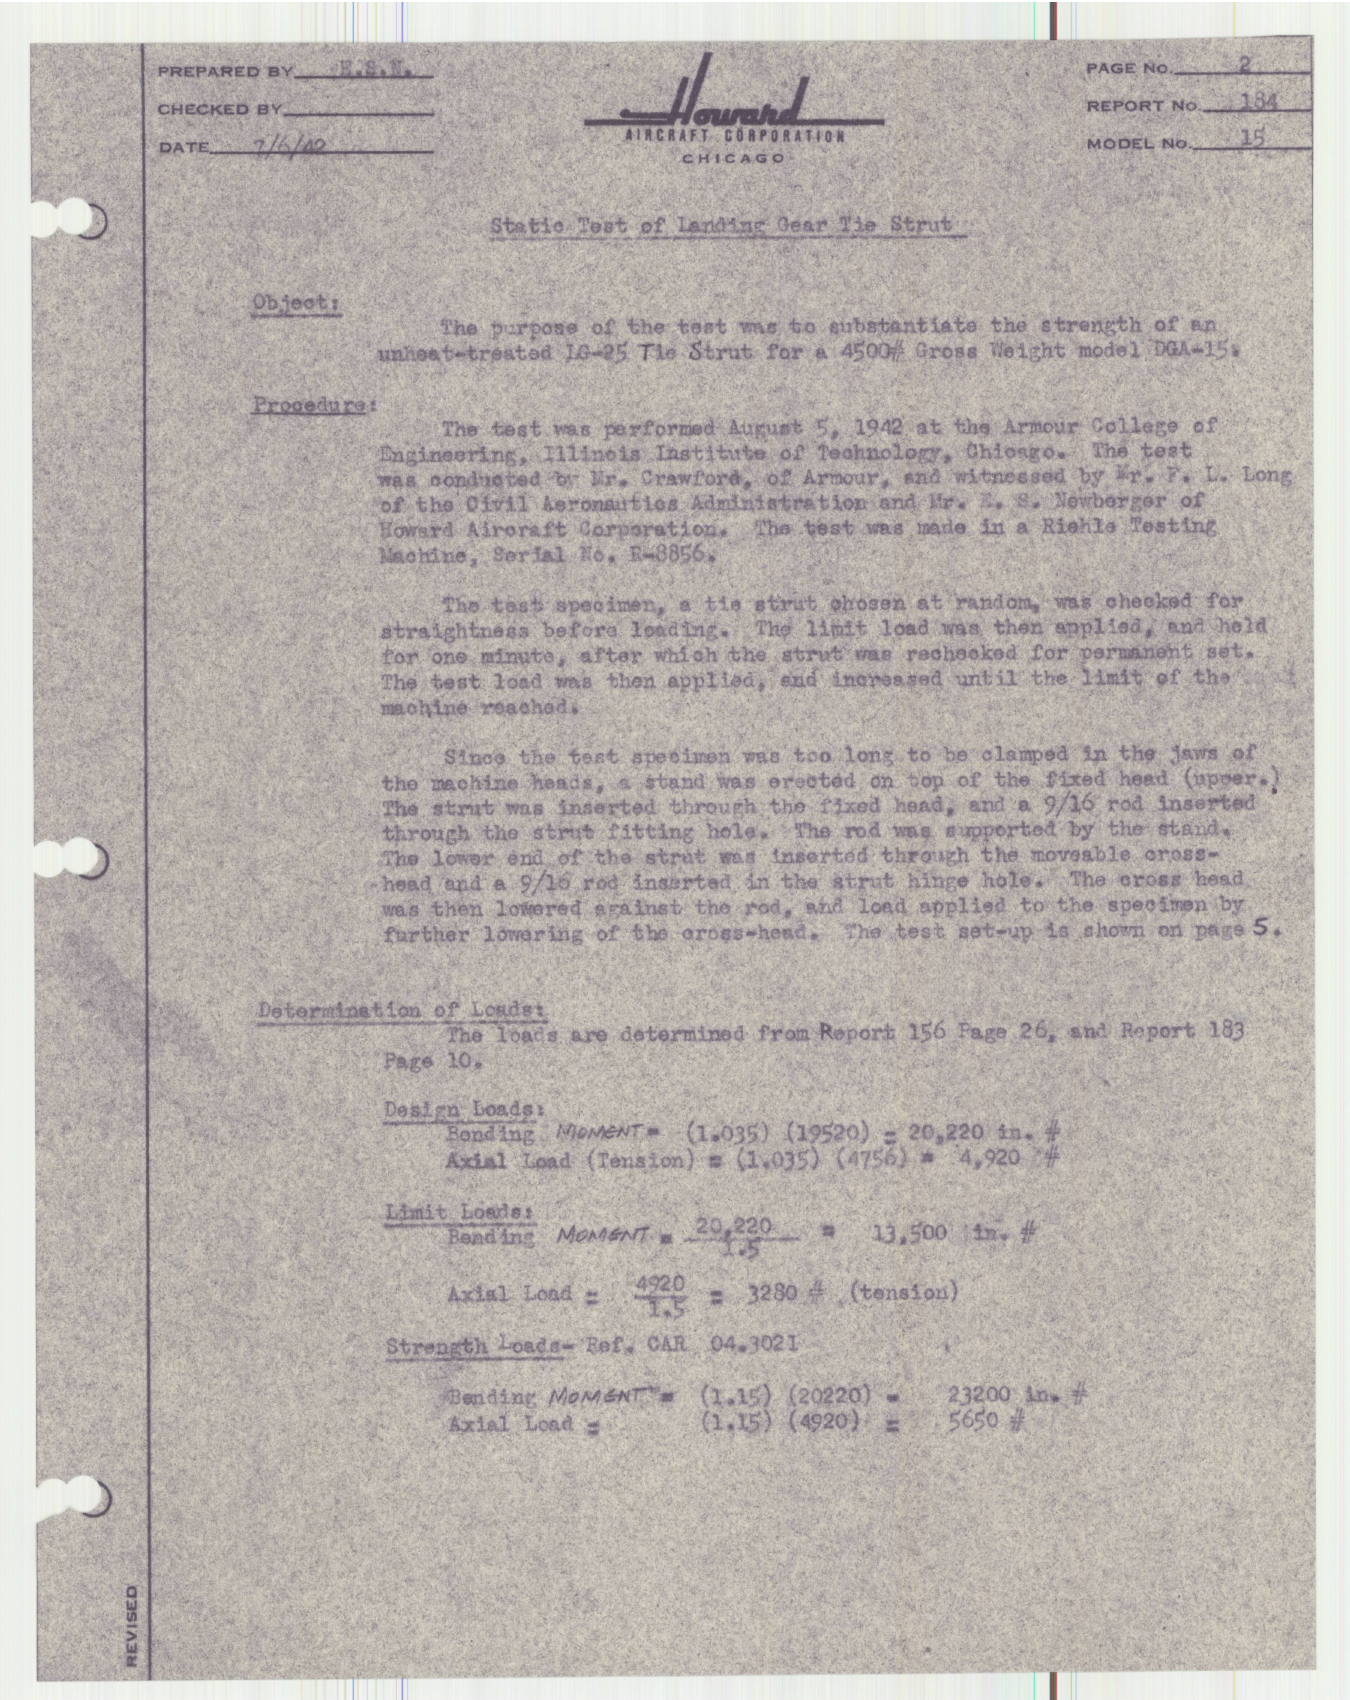 Sample page 3 from AirCorps Library document: Report 184, Static Test of Landing Gear Tie Strut, DGA-15